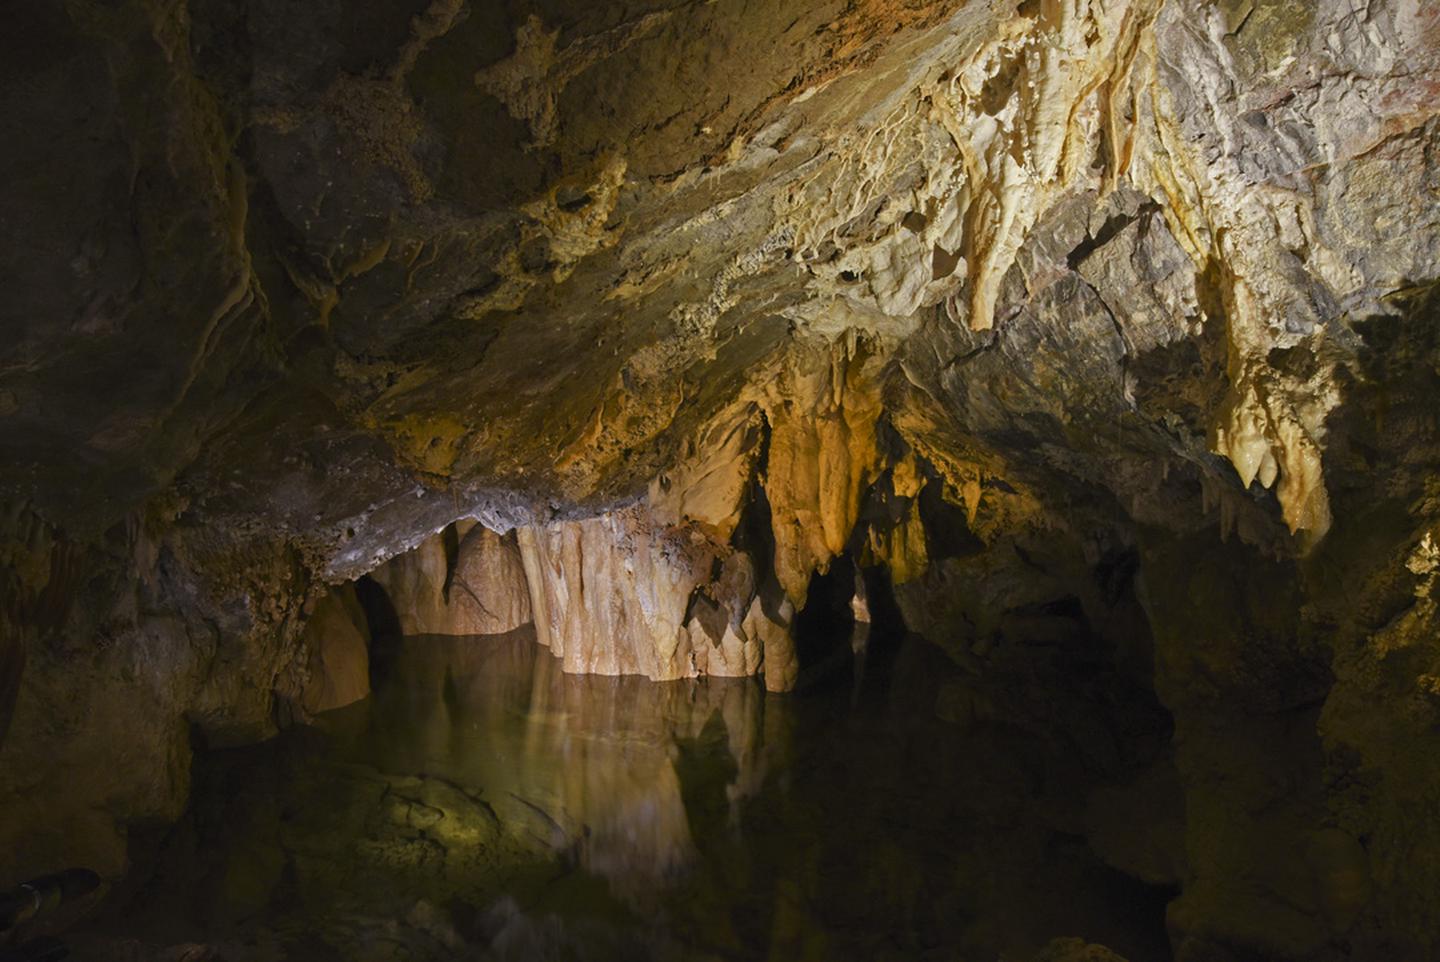 Clear cave lake surrounded by stalactites and other formationsMiddle Cave Lake